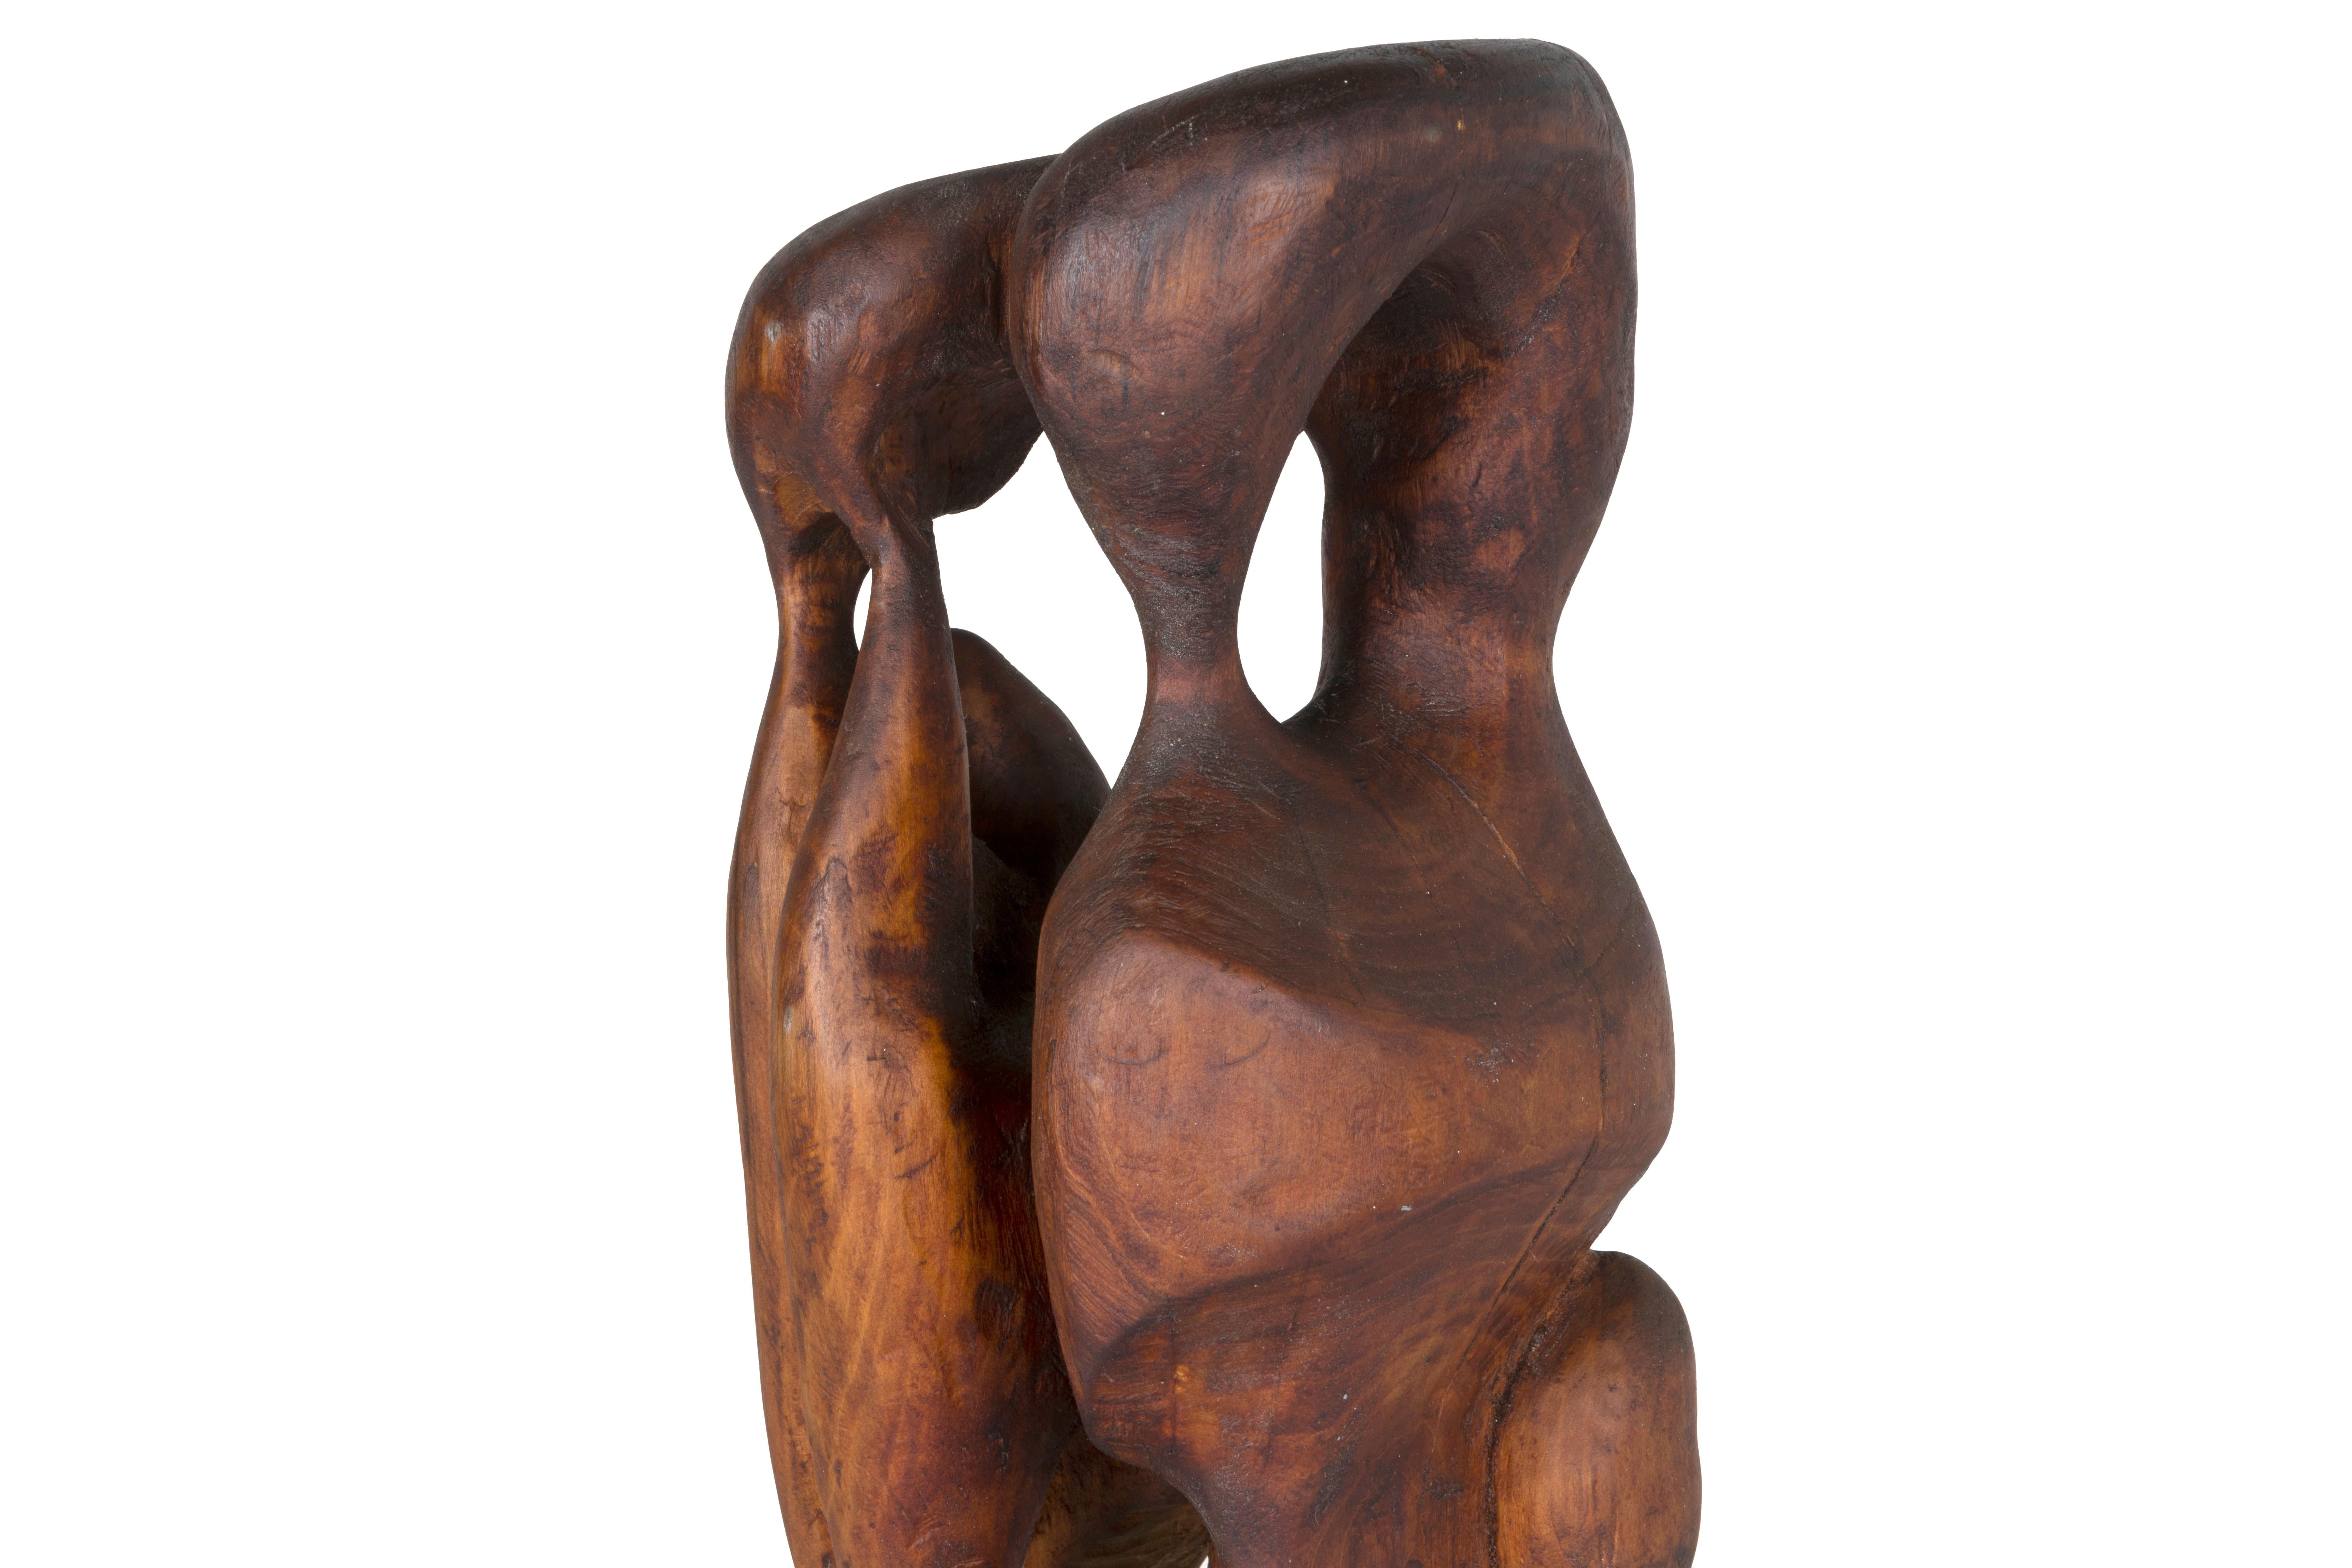 Hand-Carved Biomorphic Wood Sculpture by Wendell Upchurch